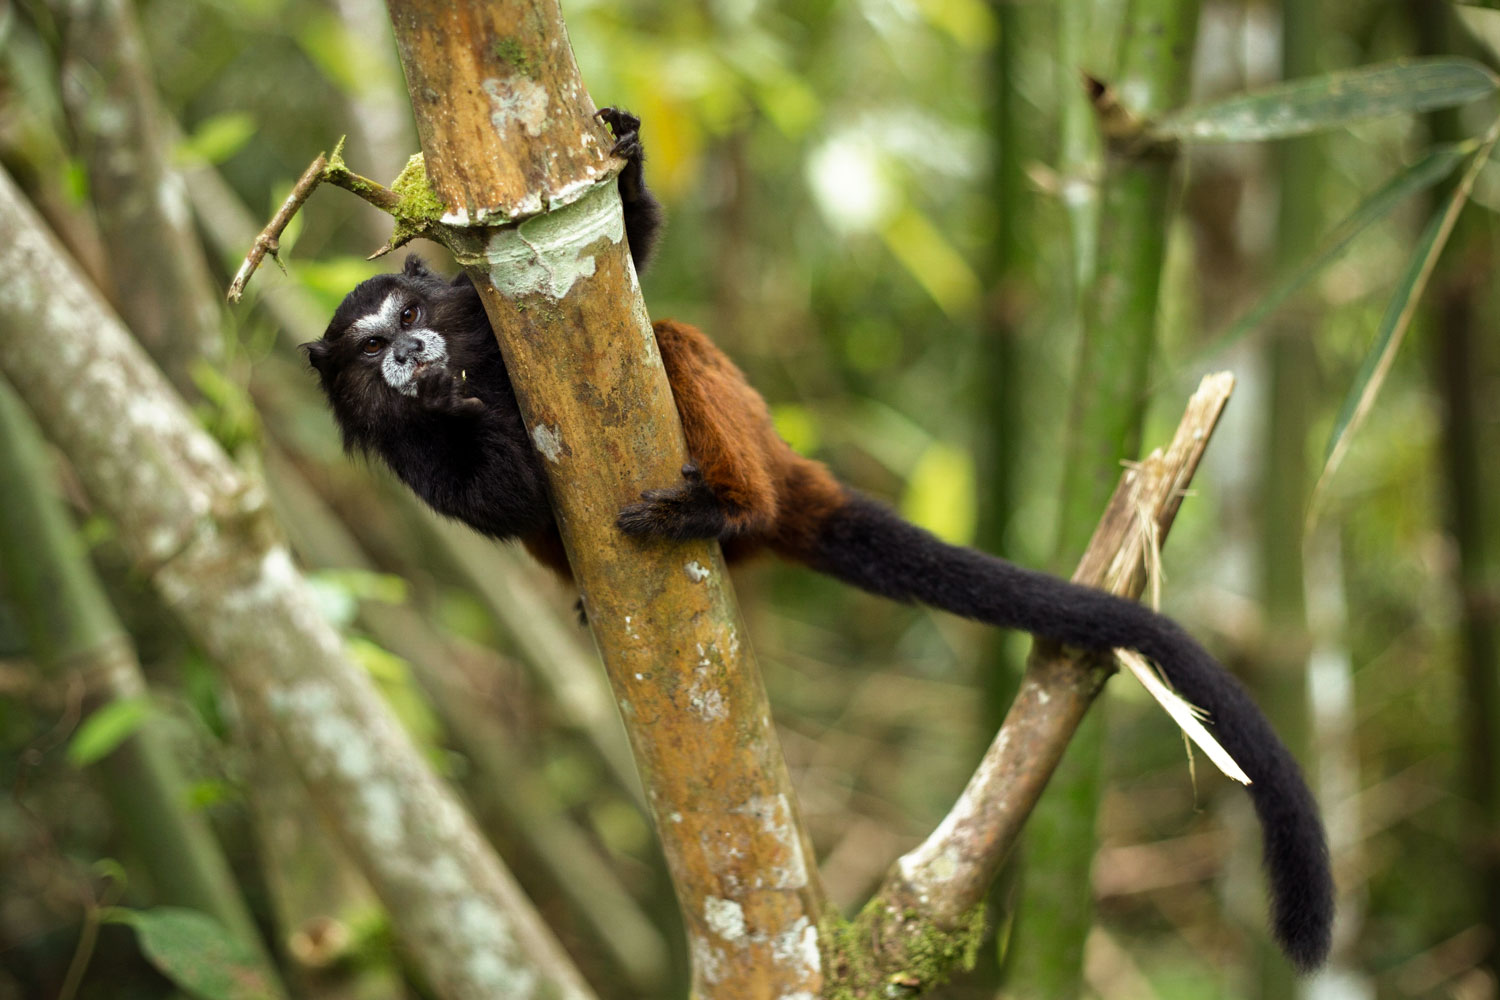 Manu National Park boasts one of the highest degrees of biodiversity in the world. Debates rage as to whether the presence of communities like Yomibato help to protect or further endanger wild animals such as this marmoset, seen swinging from a branch along the Manu River. Photo: Brett Monroe Garner